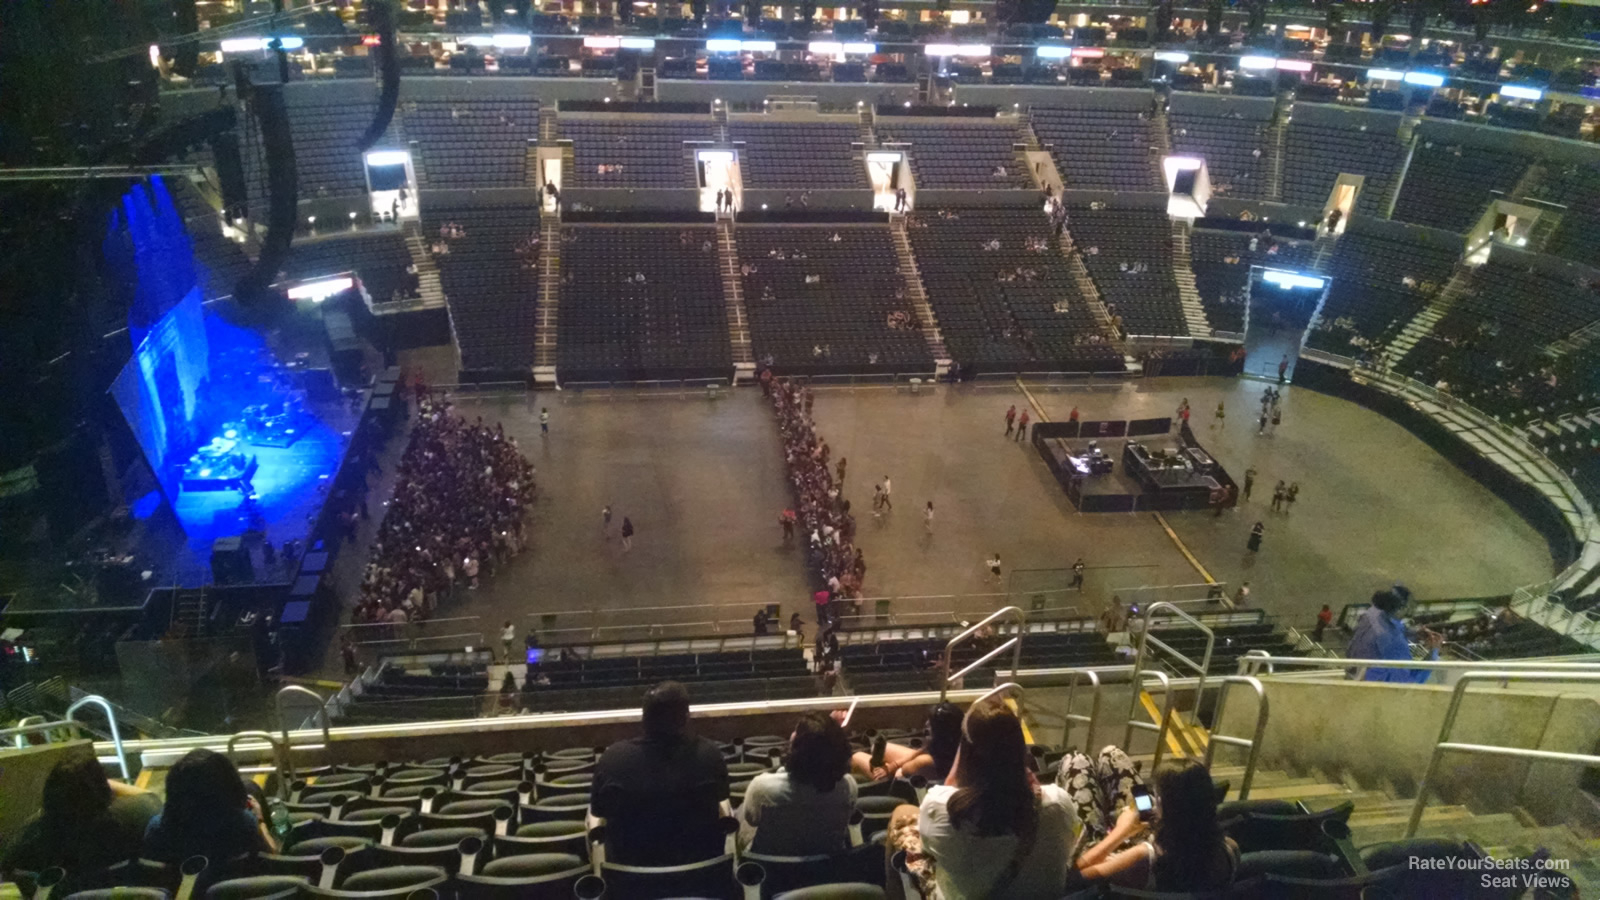 Staples Center Section 319 Concert Seating RateYourSeats - Seating ...